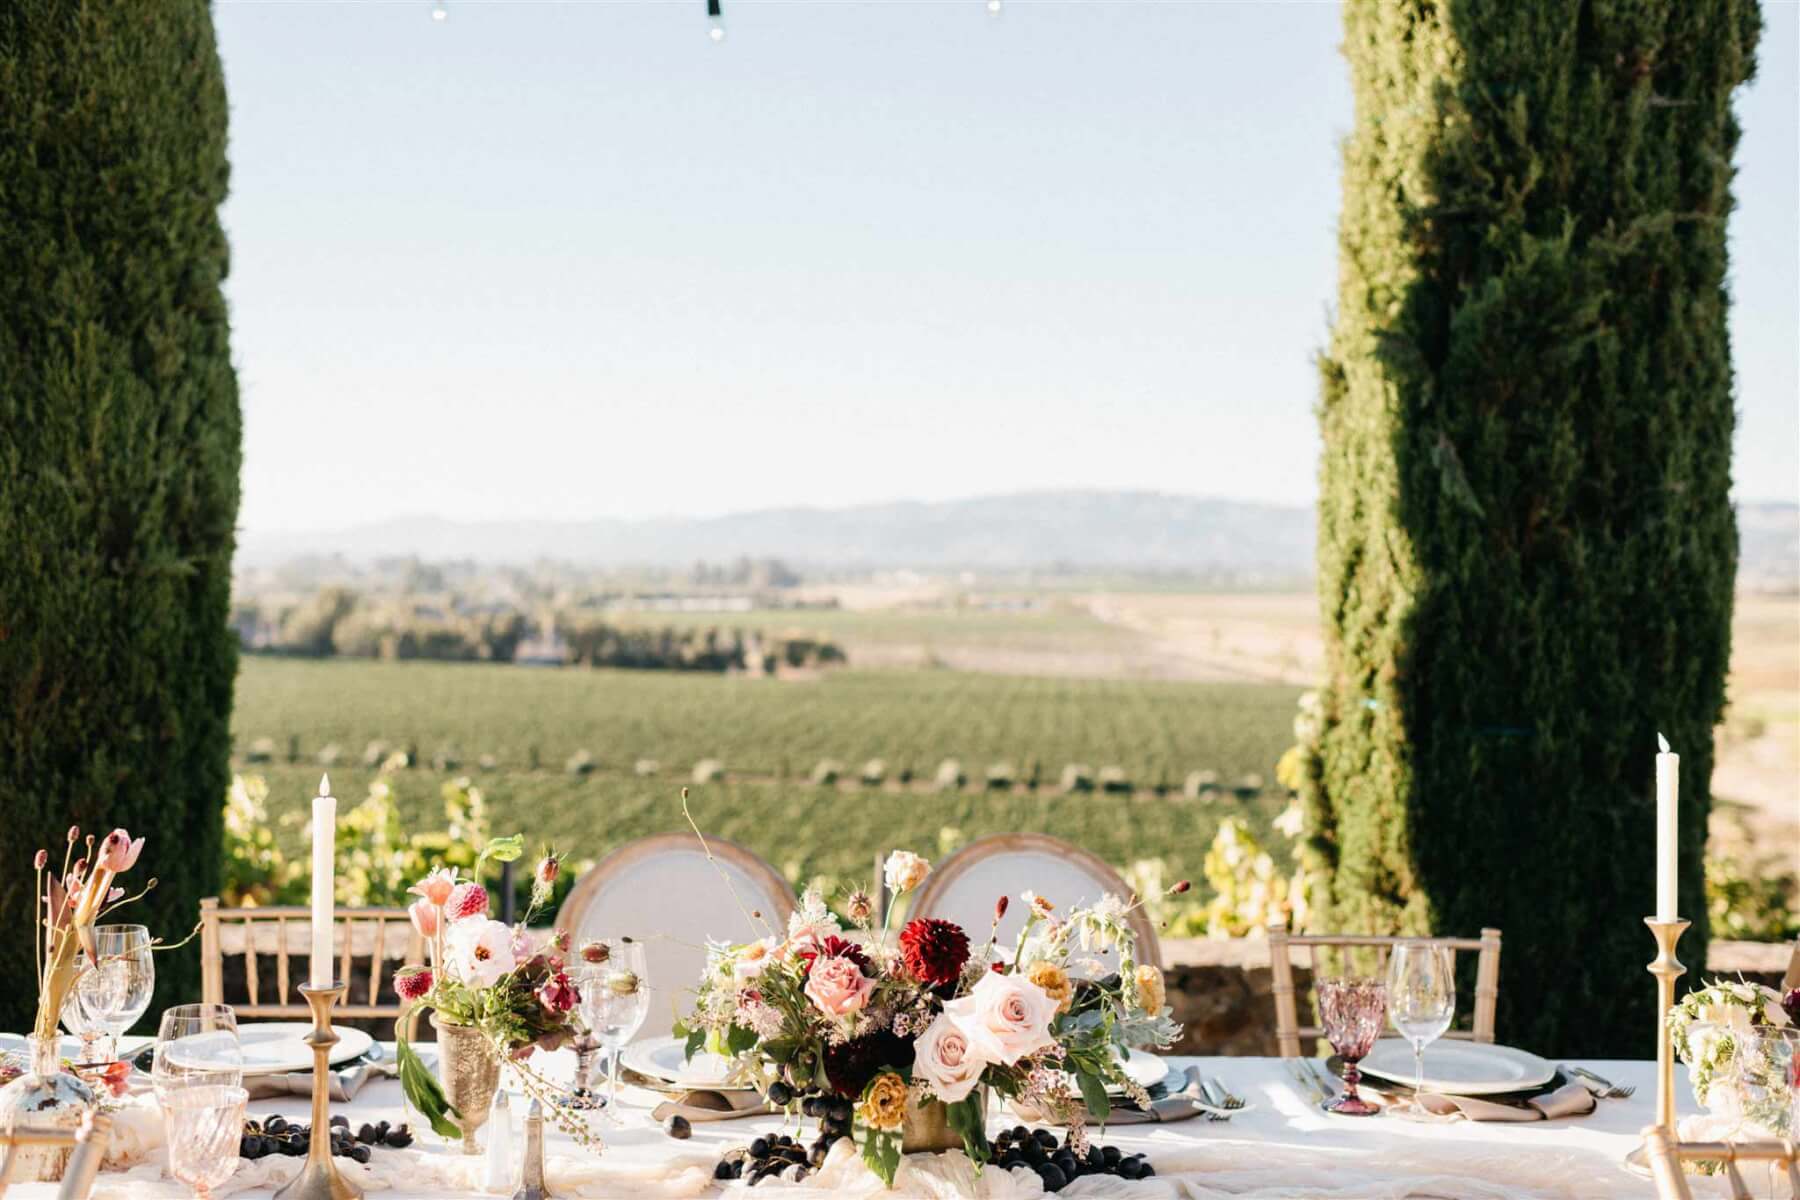 A table set up for the wedding in the vineyard with elegant floral arrangements.